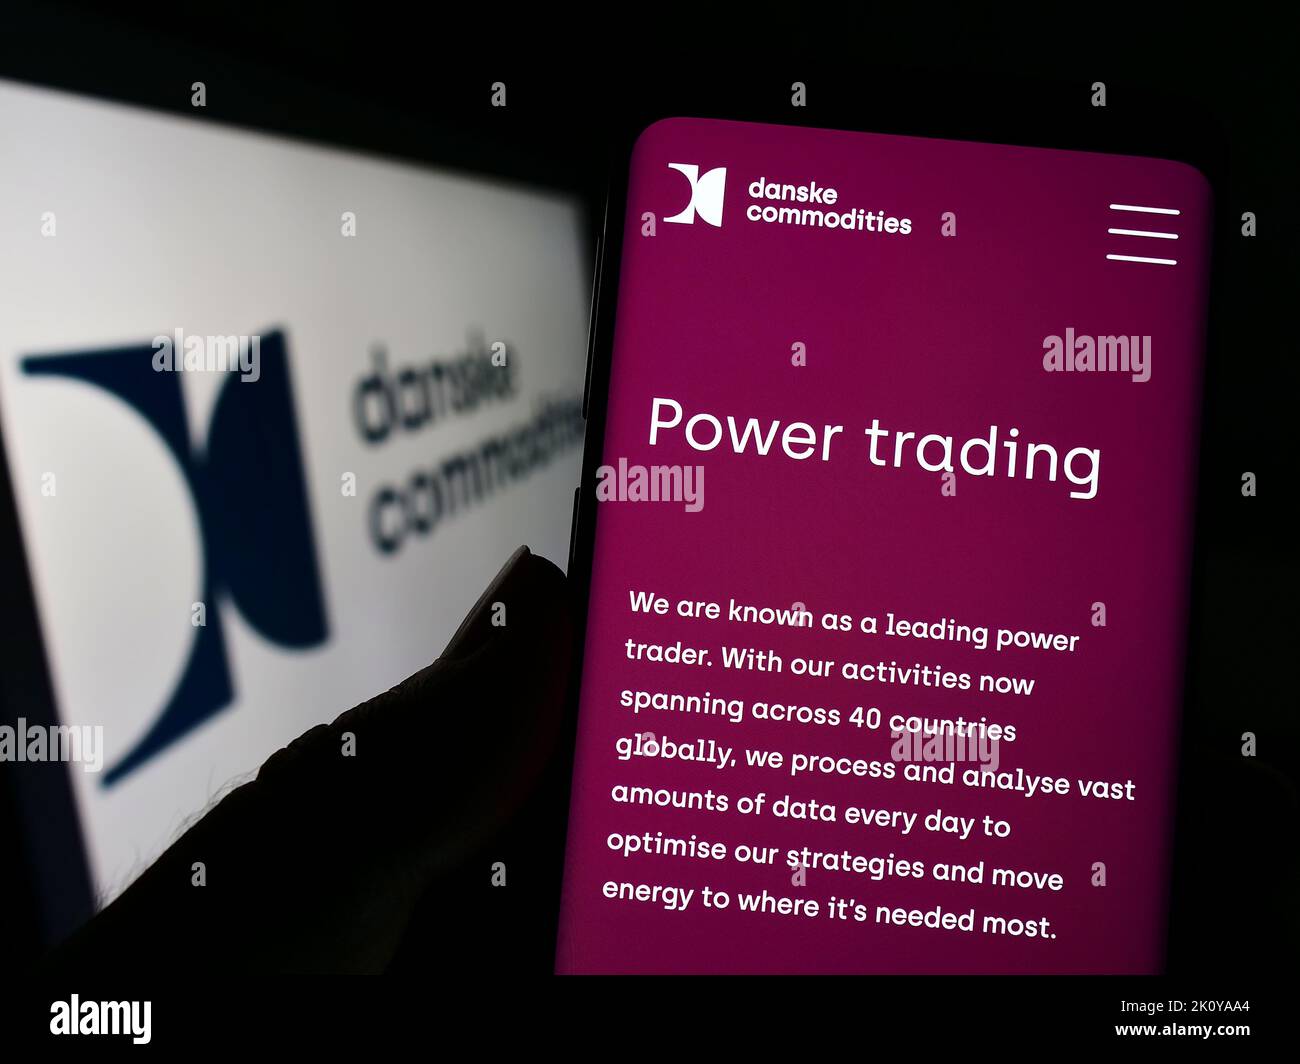 Person holding cellphone with webpage of energy trading company Danske Commodities AS on screen in front of logo. Focus on center of phone display. Stock Photo